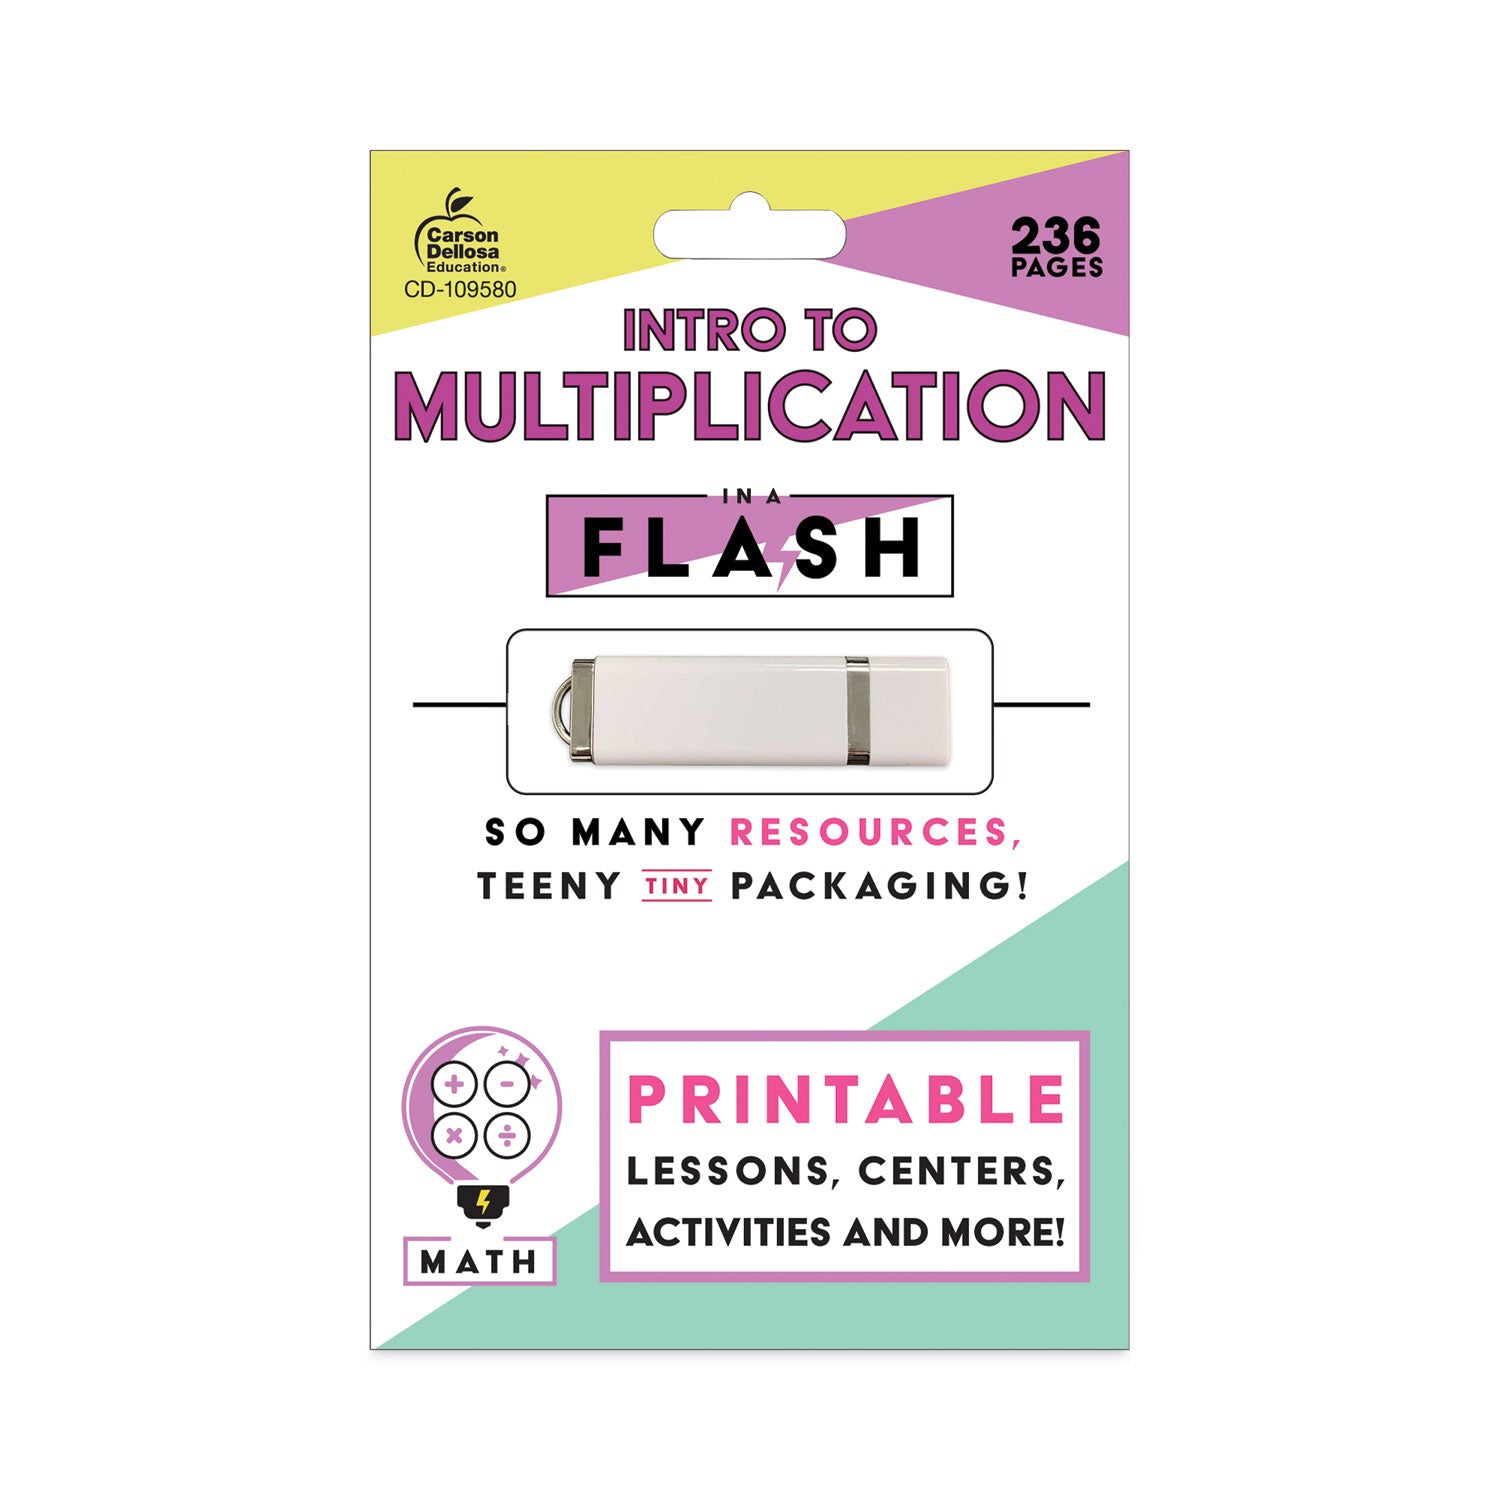 in-a-flash-usb-intro-to-multiplication-ages-7-9-236-pages_cdp109580 - 1